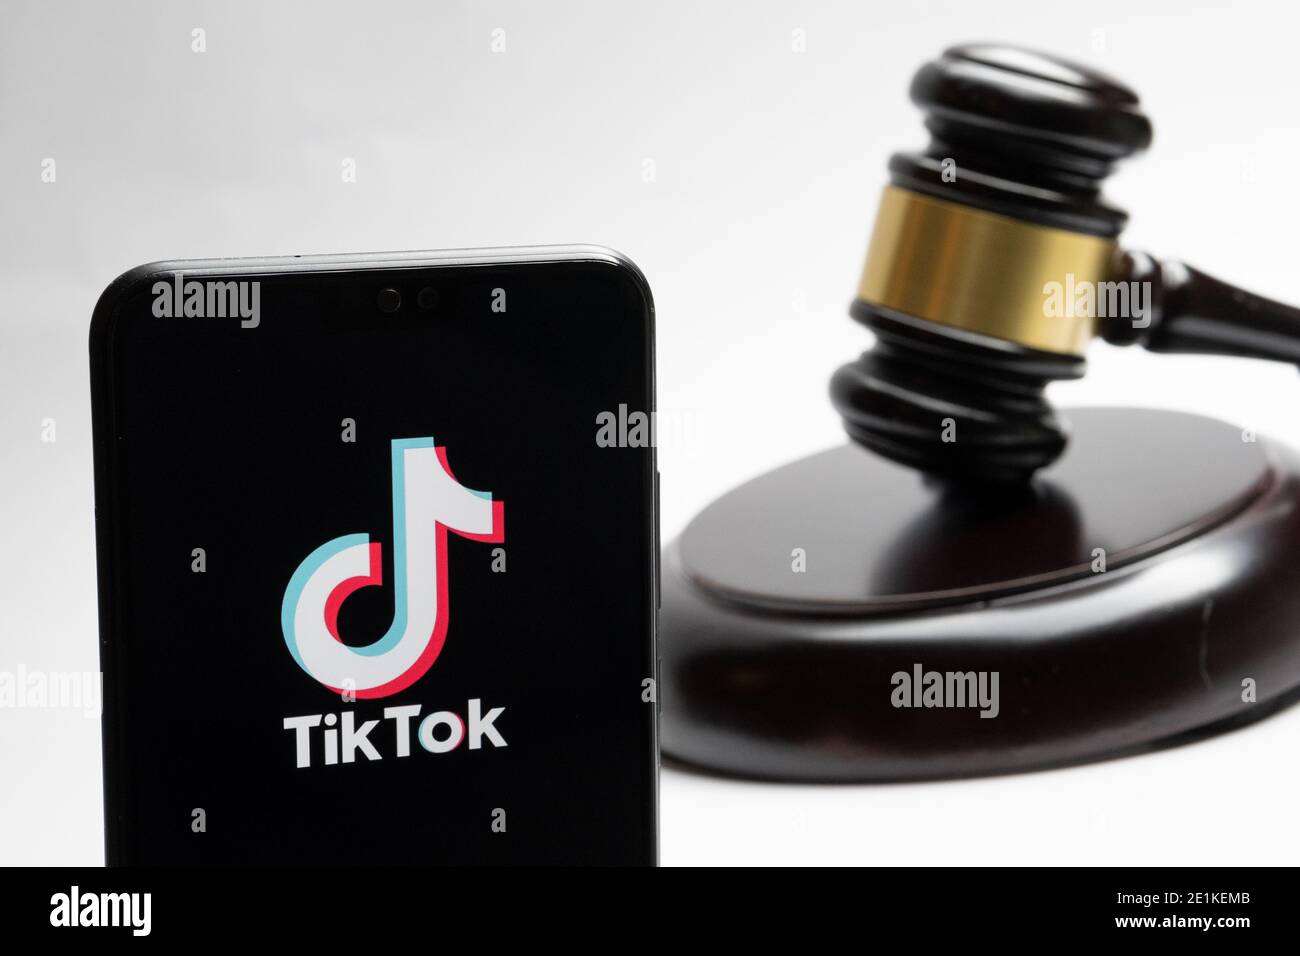 Stafford, United Kingdom - January 7 2021: TikTok logo seen on the smartphone and a judge gavel blurred on the background. Concept. Stock Photo